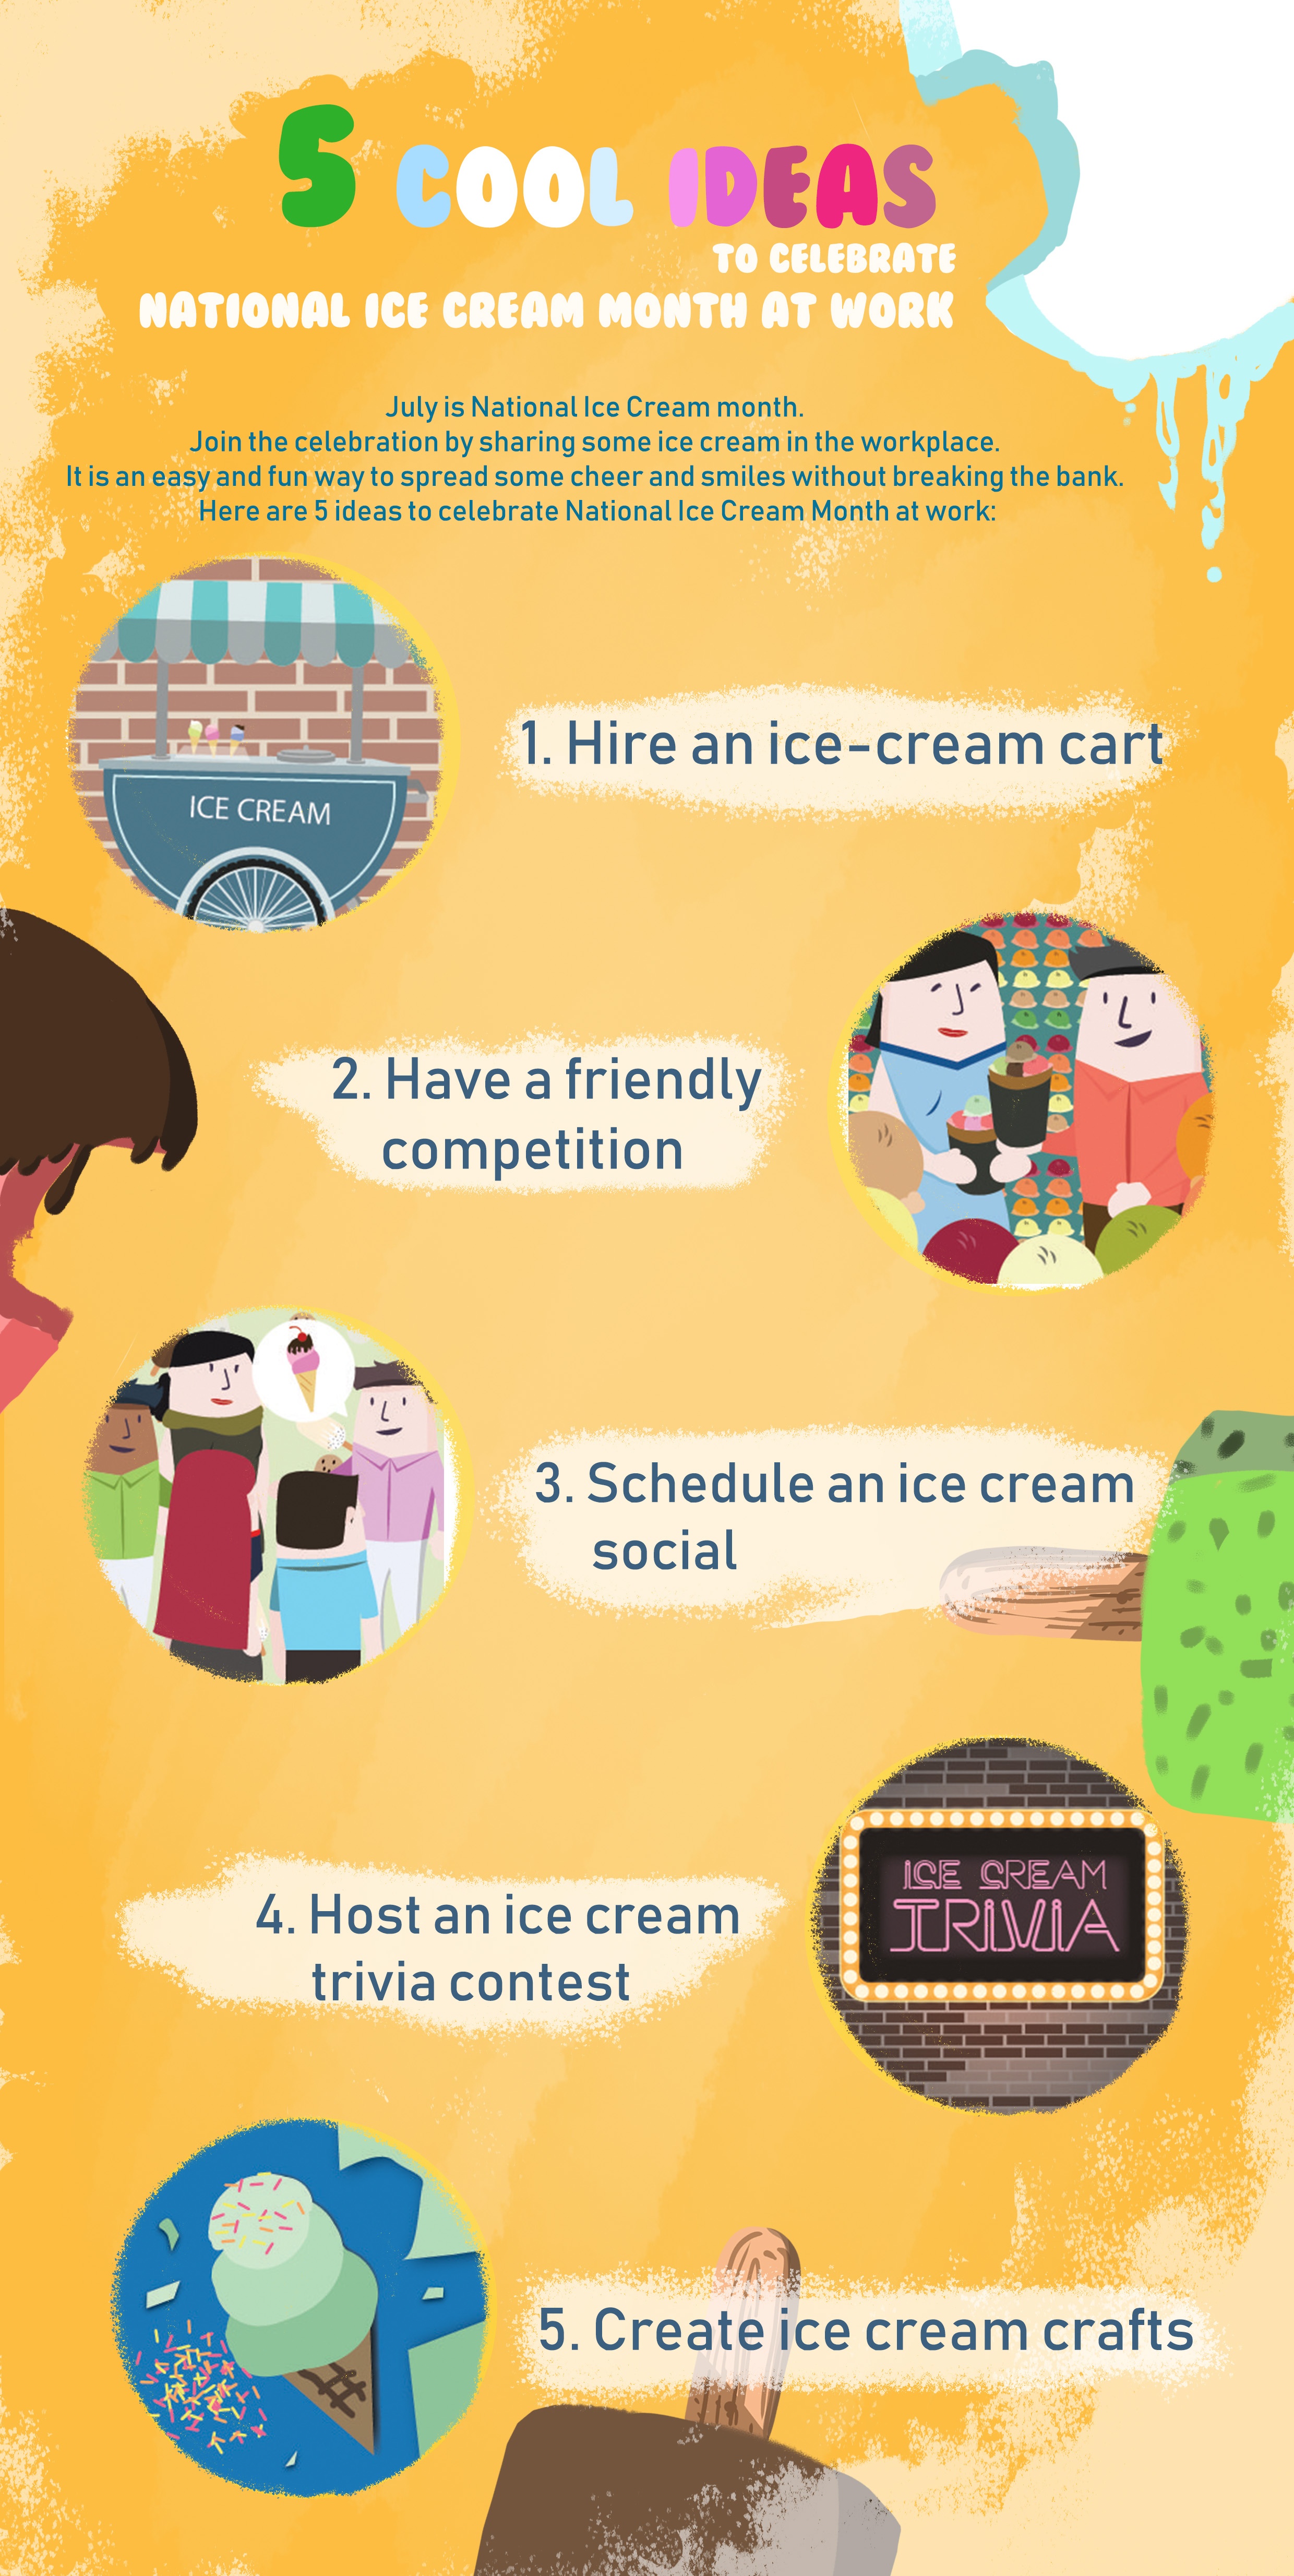 5 Cool Ideas To Celebrate National Ice Cream Month At Work